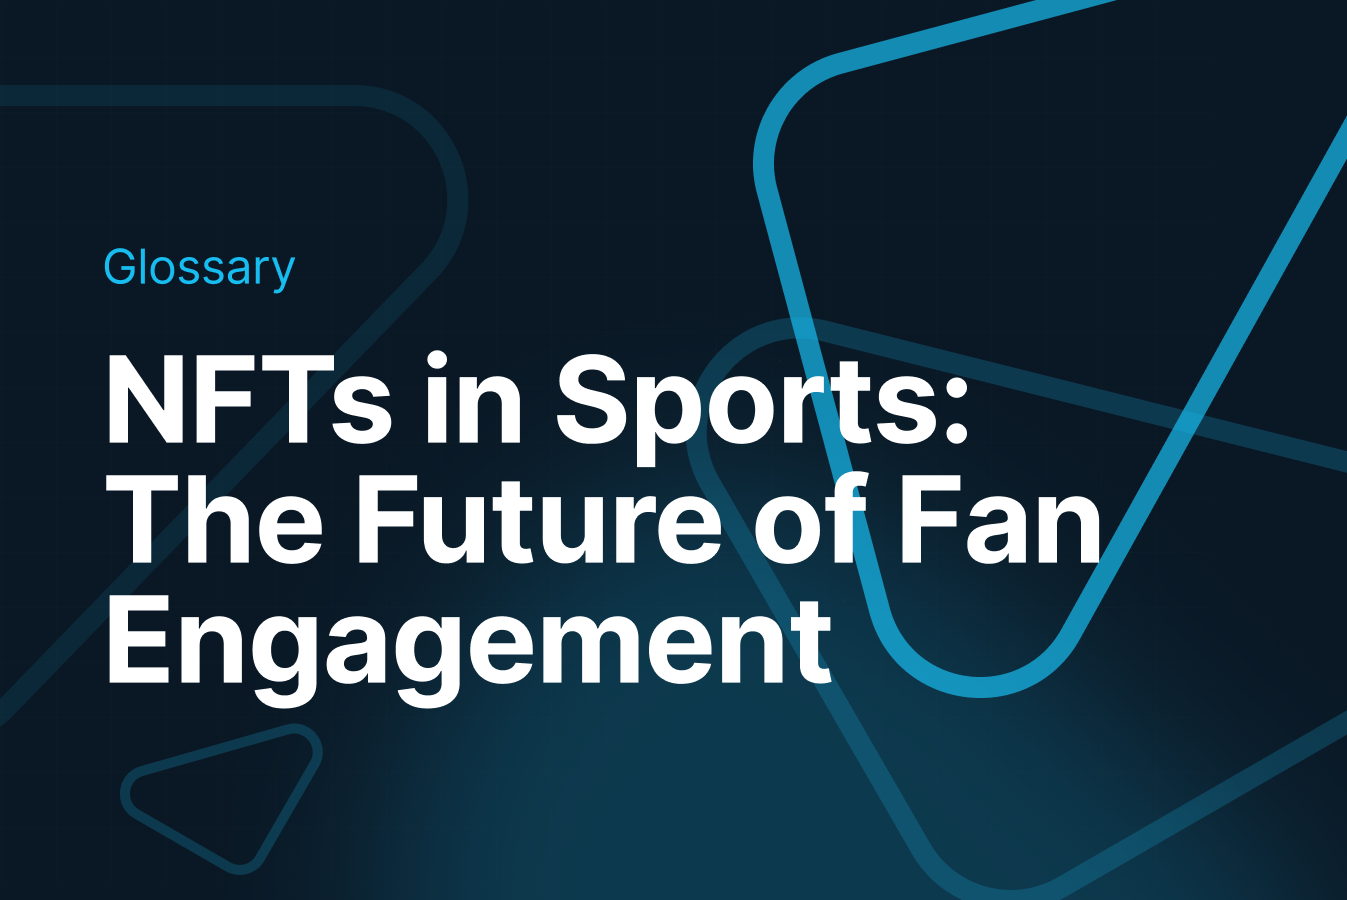 NFTs in Sports: The Future of Fan Engagement